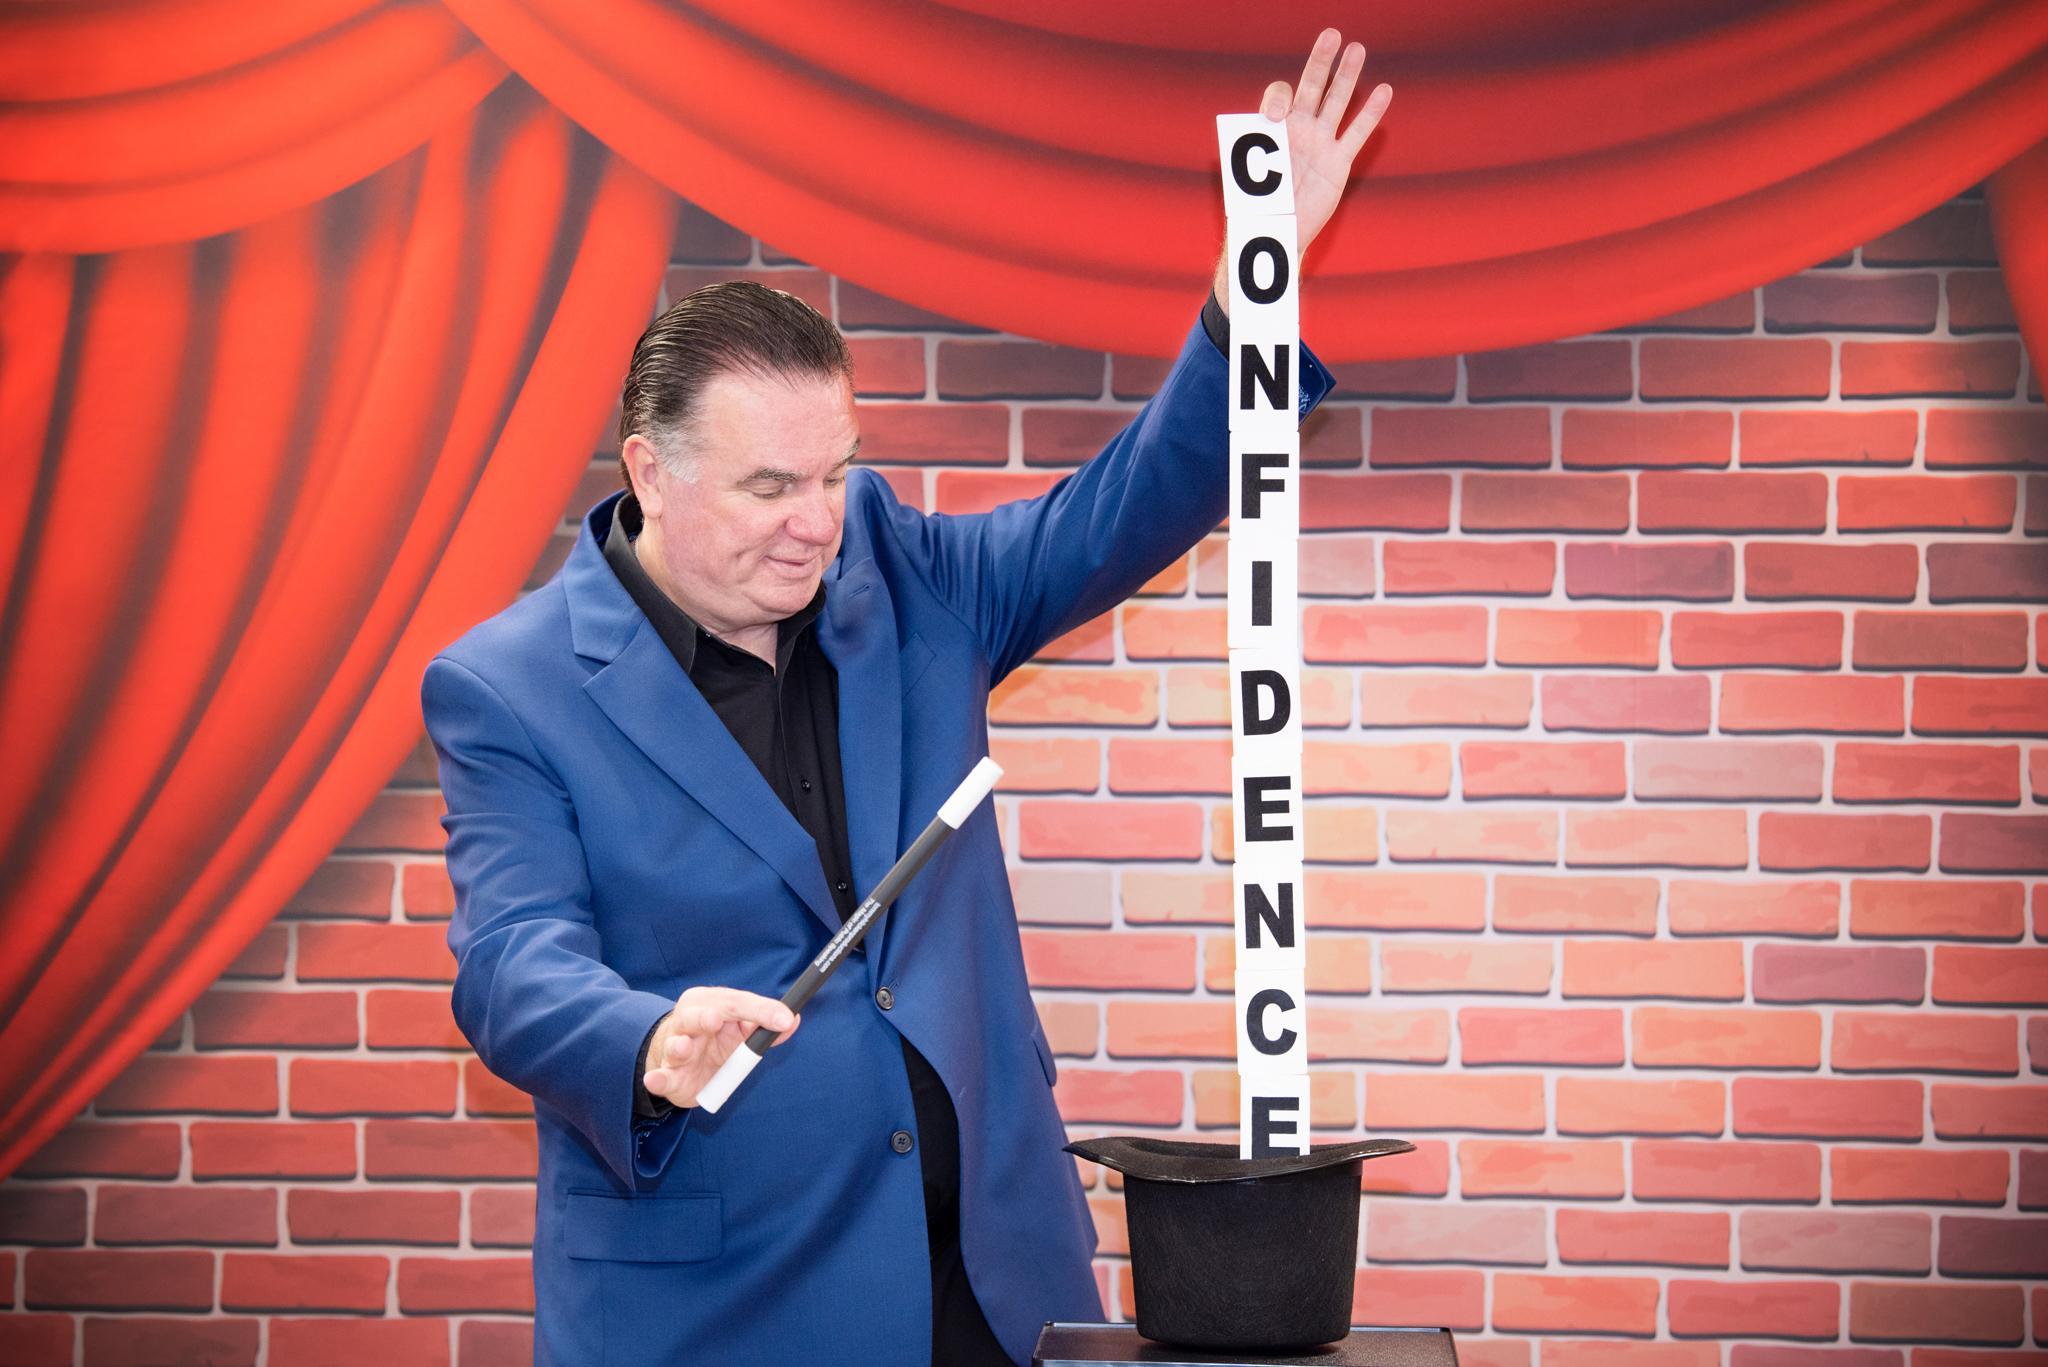 A man in a blue jacket holding a magic wand and pulling out the word "Confidence" out of the magic hat.